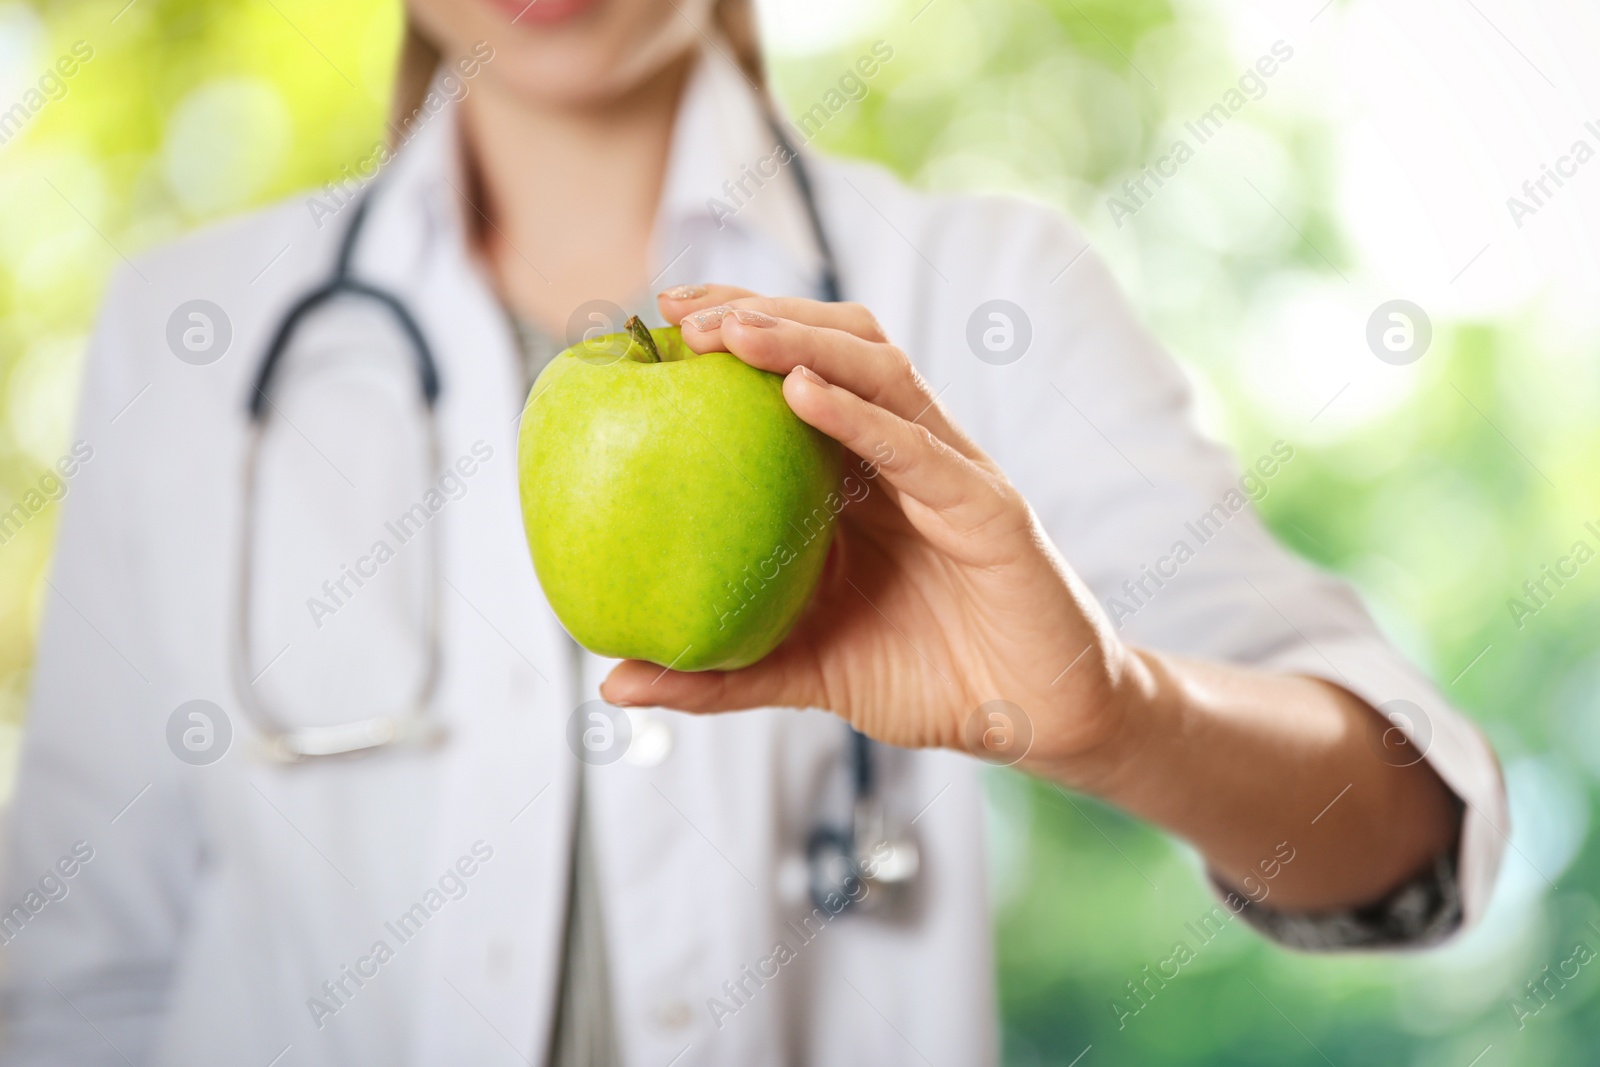 Image of Nutritionist with fresh apple on blurred green background, closeup